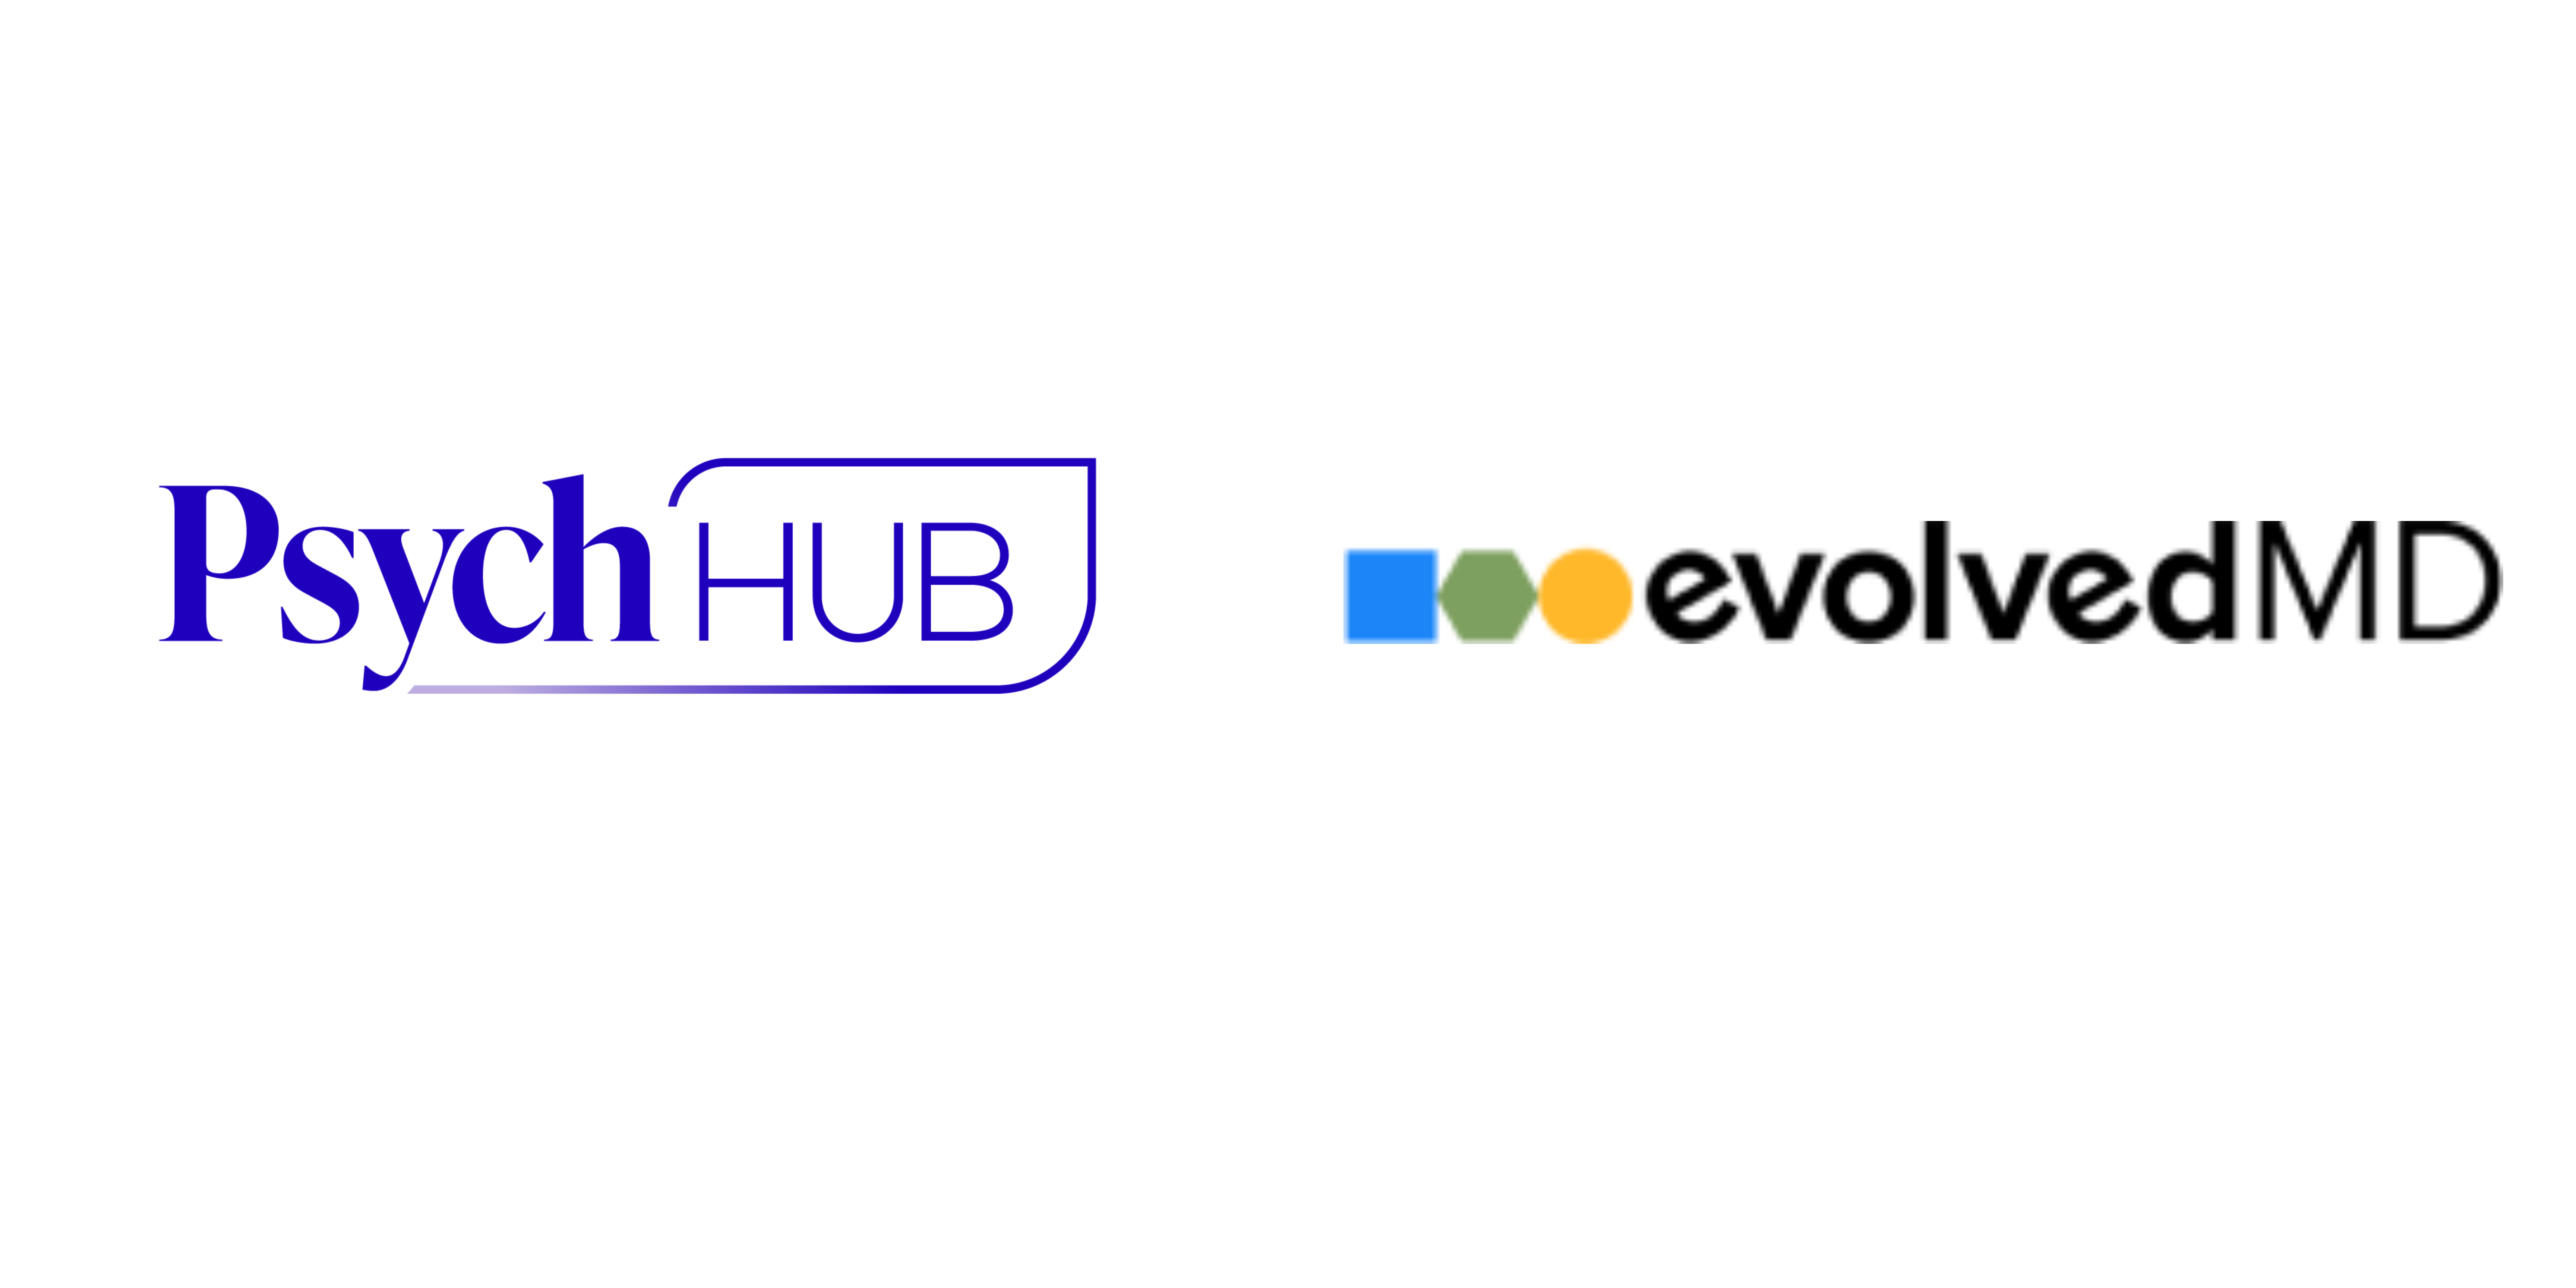 evolvedMD Partners with Evidence-Based Education Experts Psych Hub to Train Best-In-Class Clinical Teams